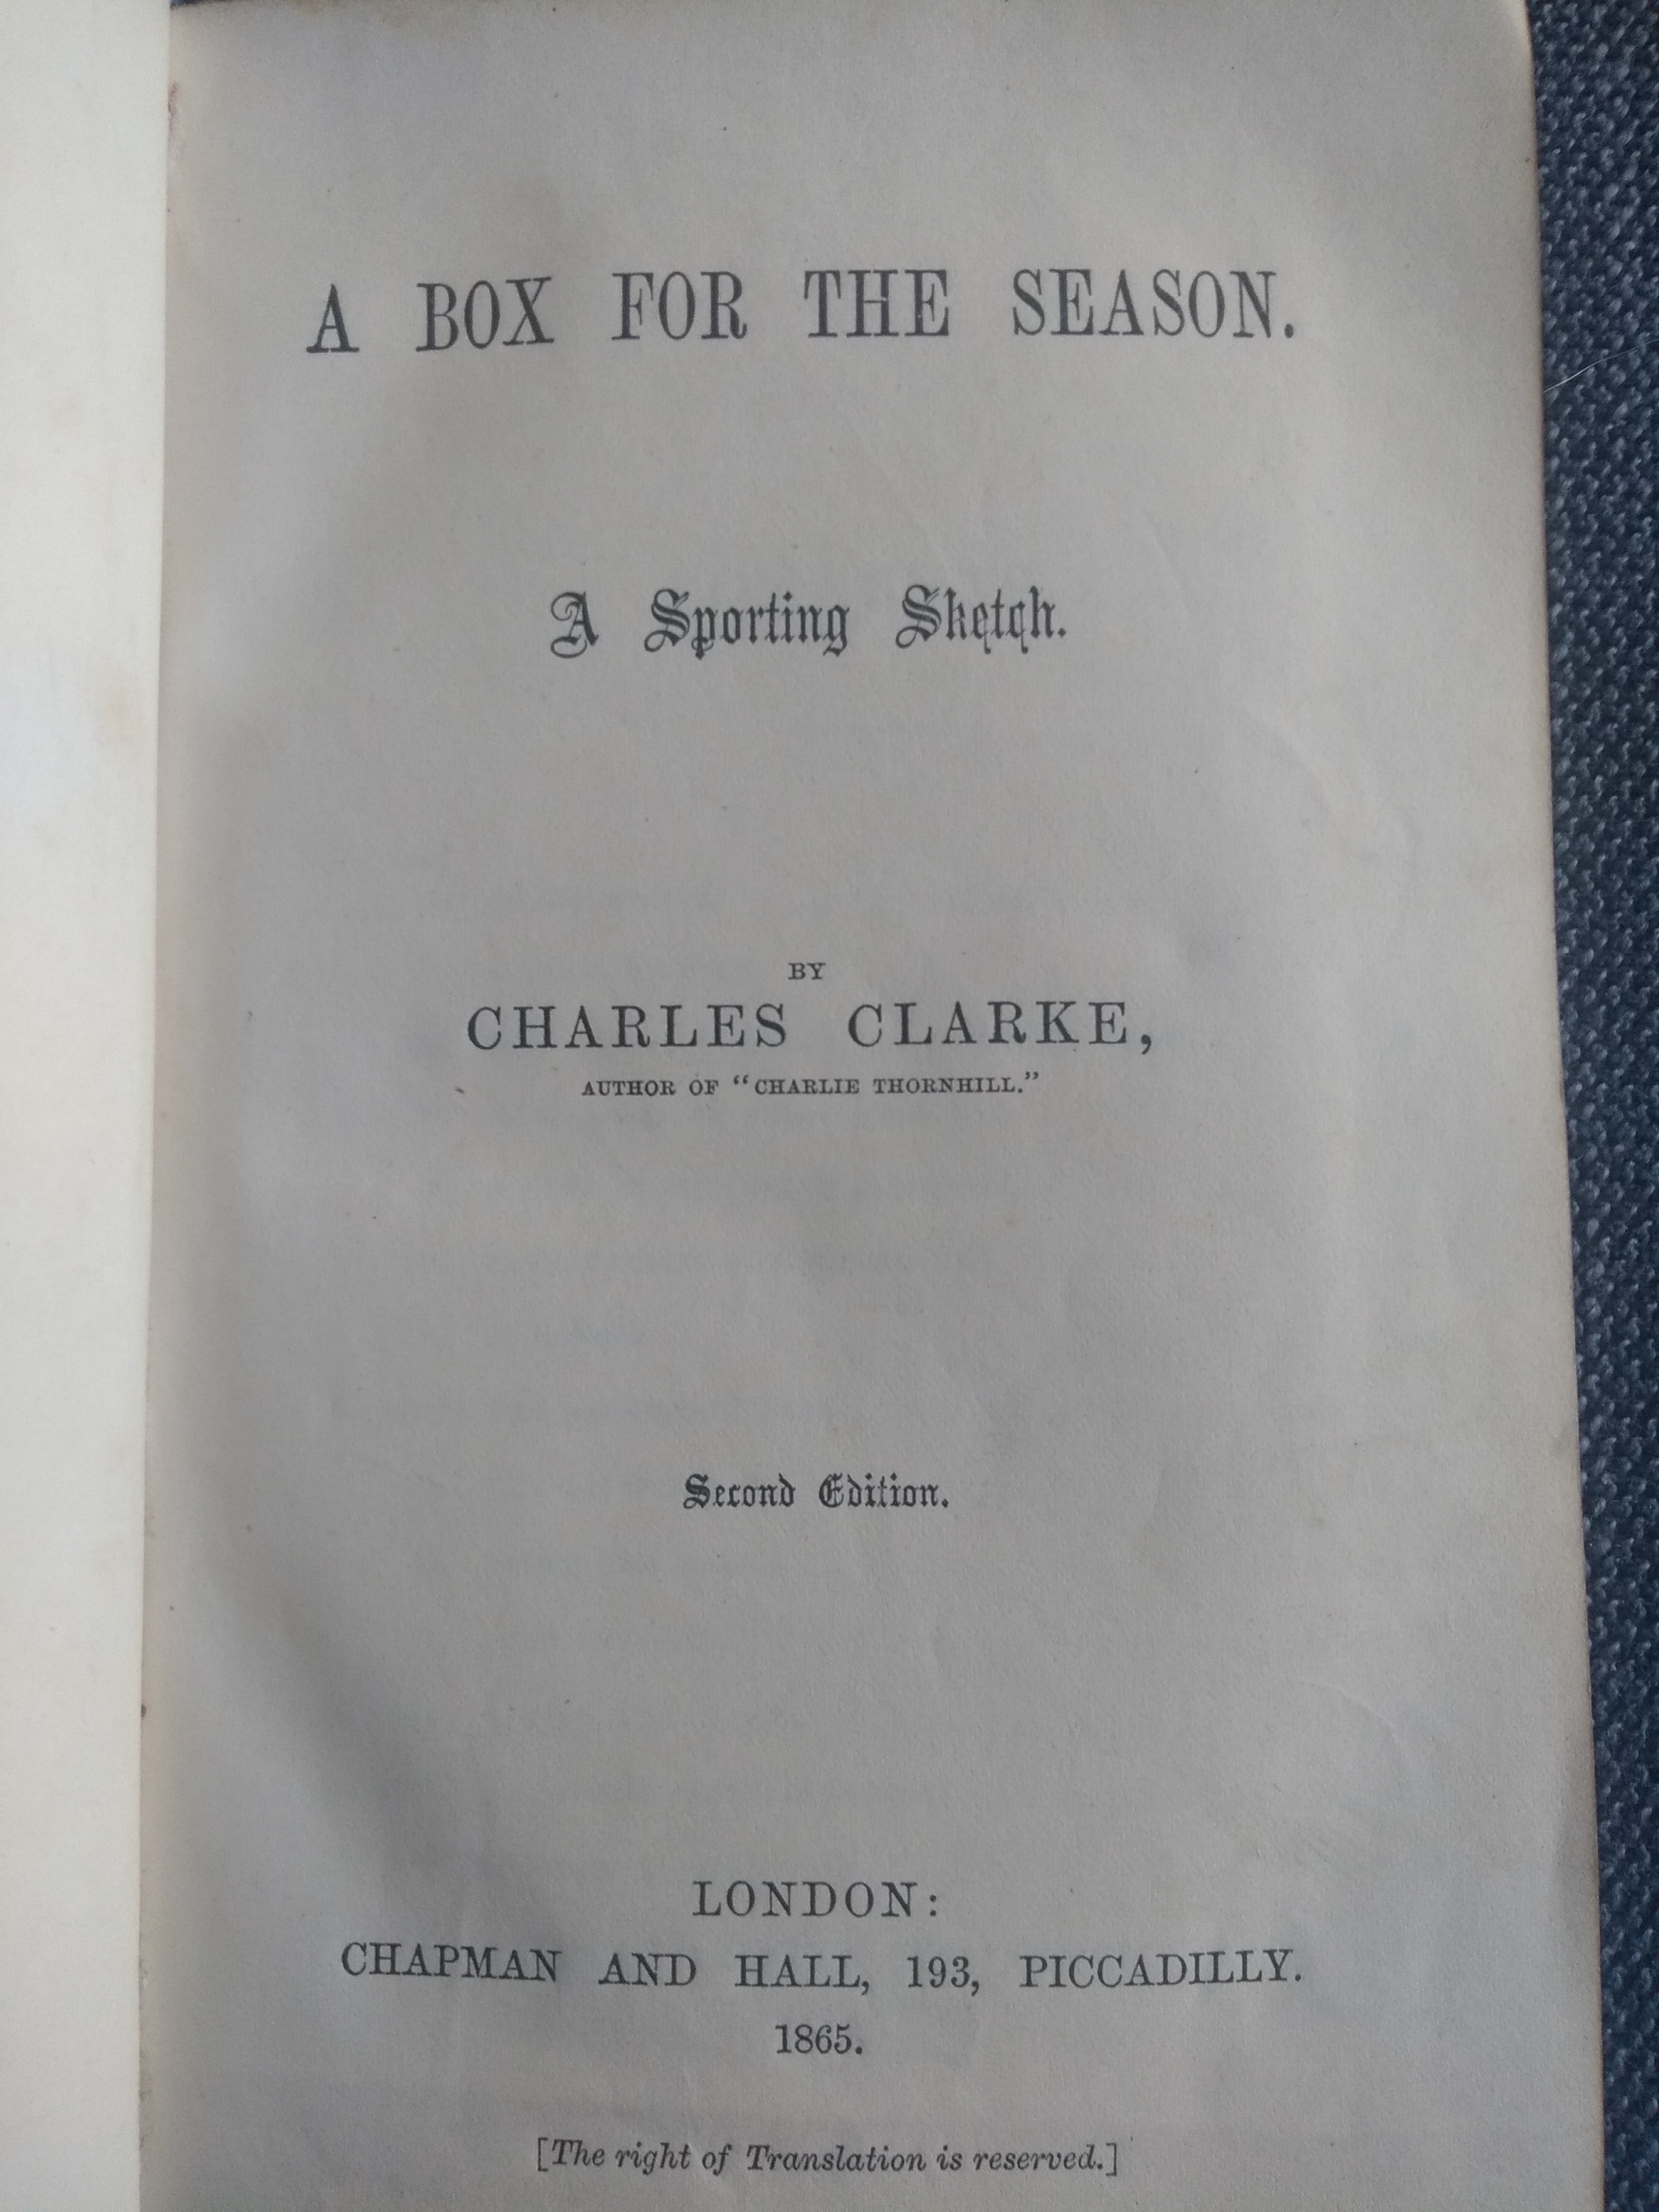 A Box for The Season: A Sporting Sketch, by Charles Clarke